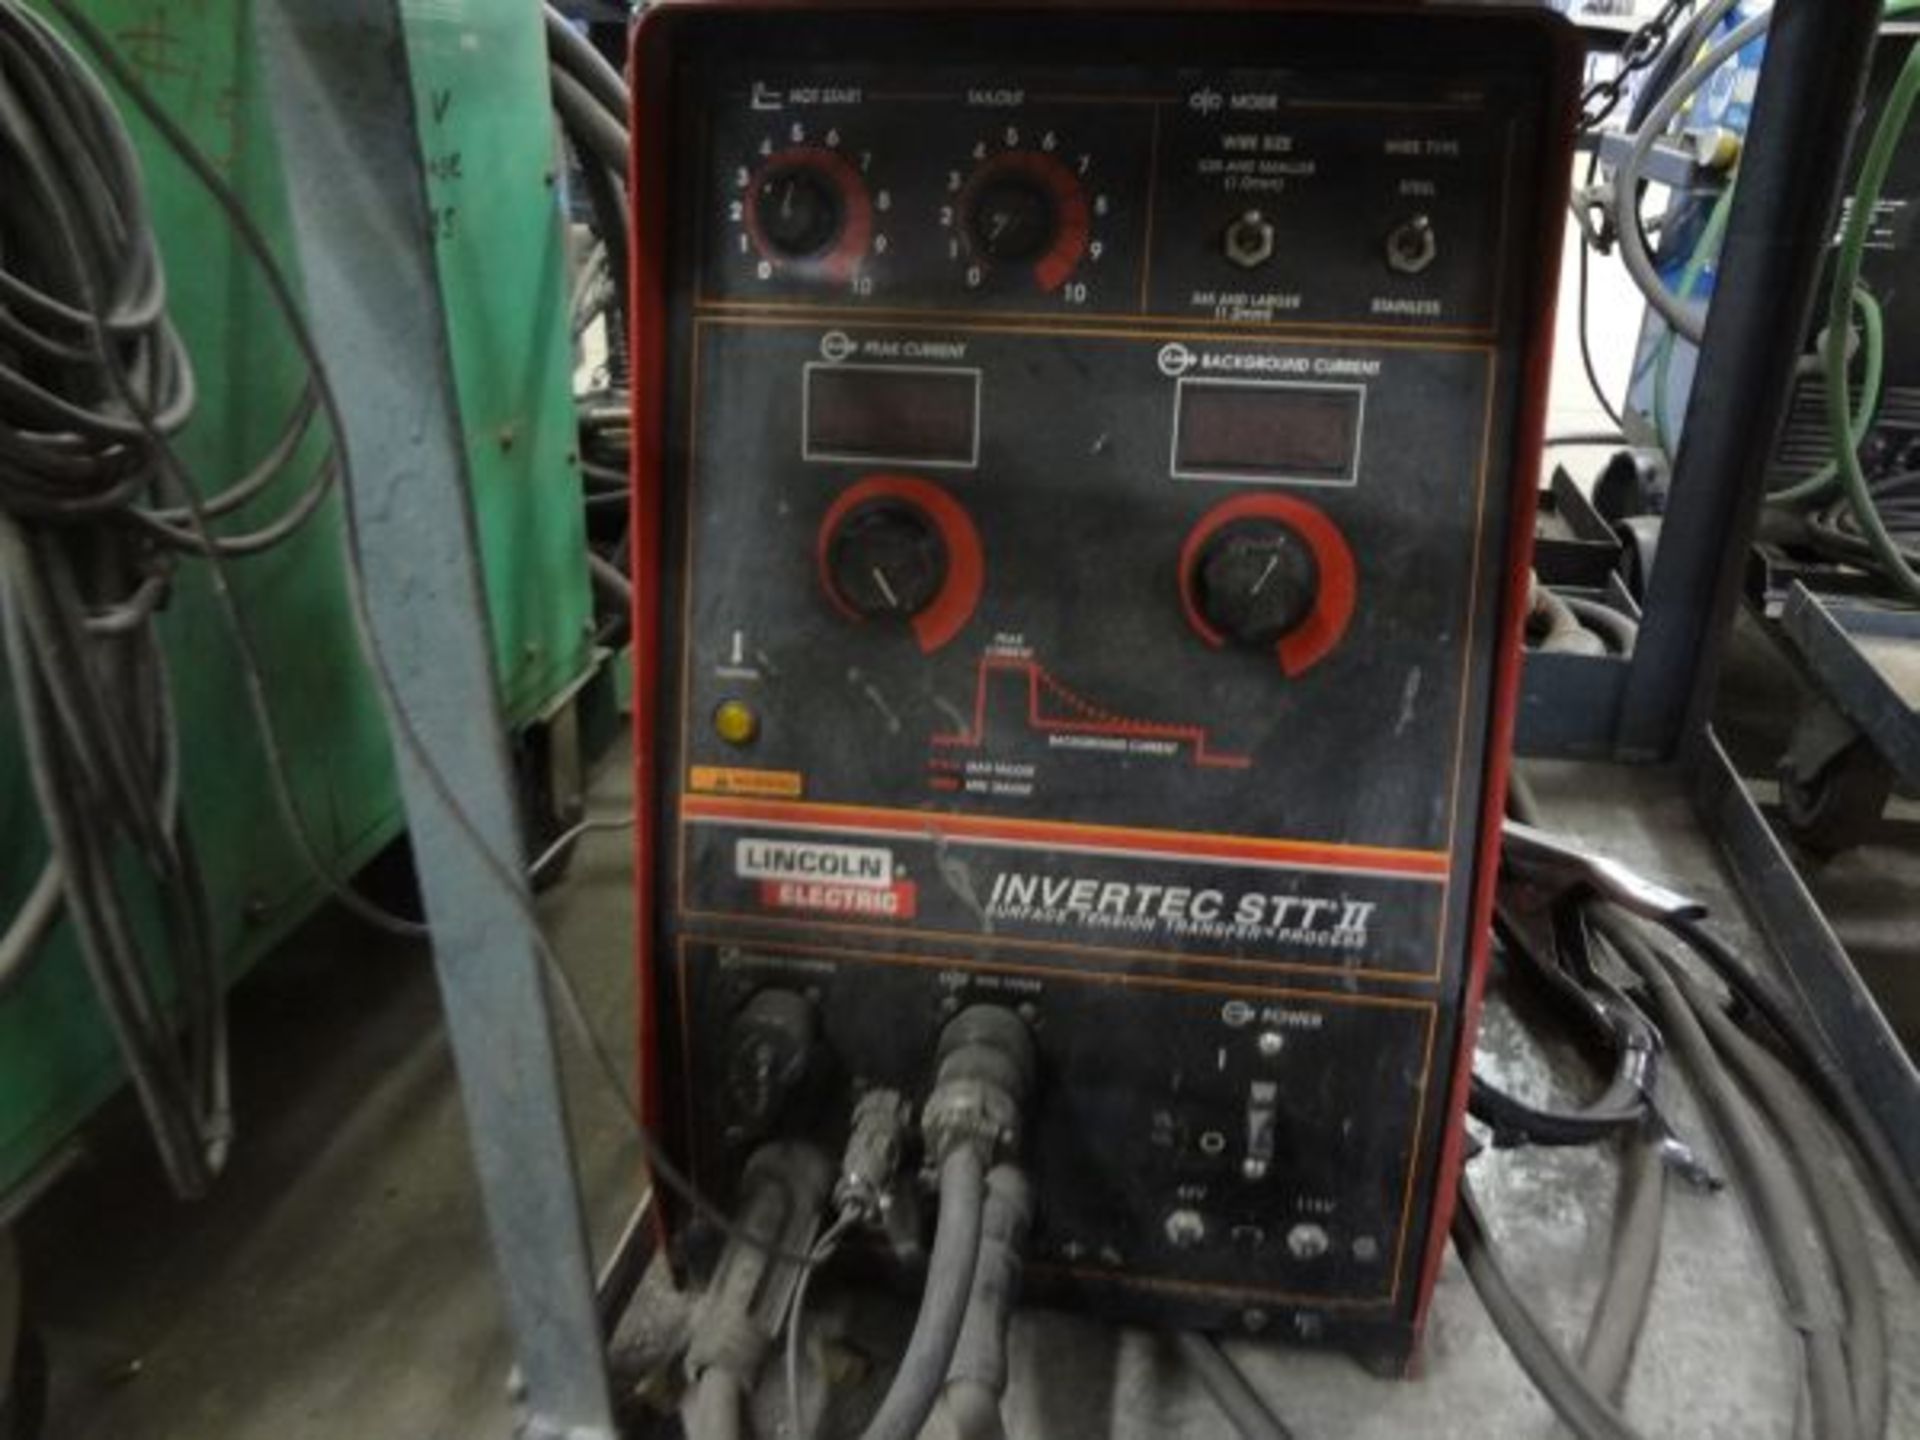 250 AMP LINCOLN INVERTEC STTII WELDER; S/N U1980400085, WITH LINCOLN LN-742 WIRE FEEDER - Image 2 of 5